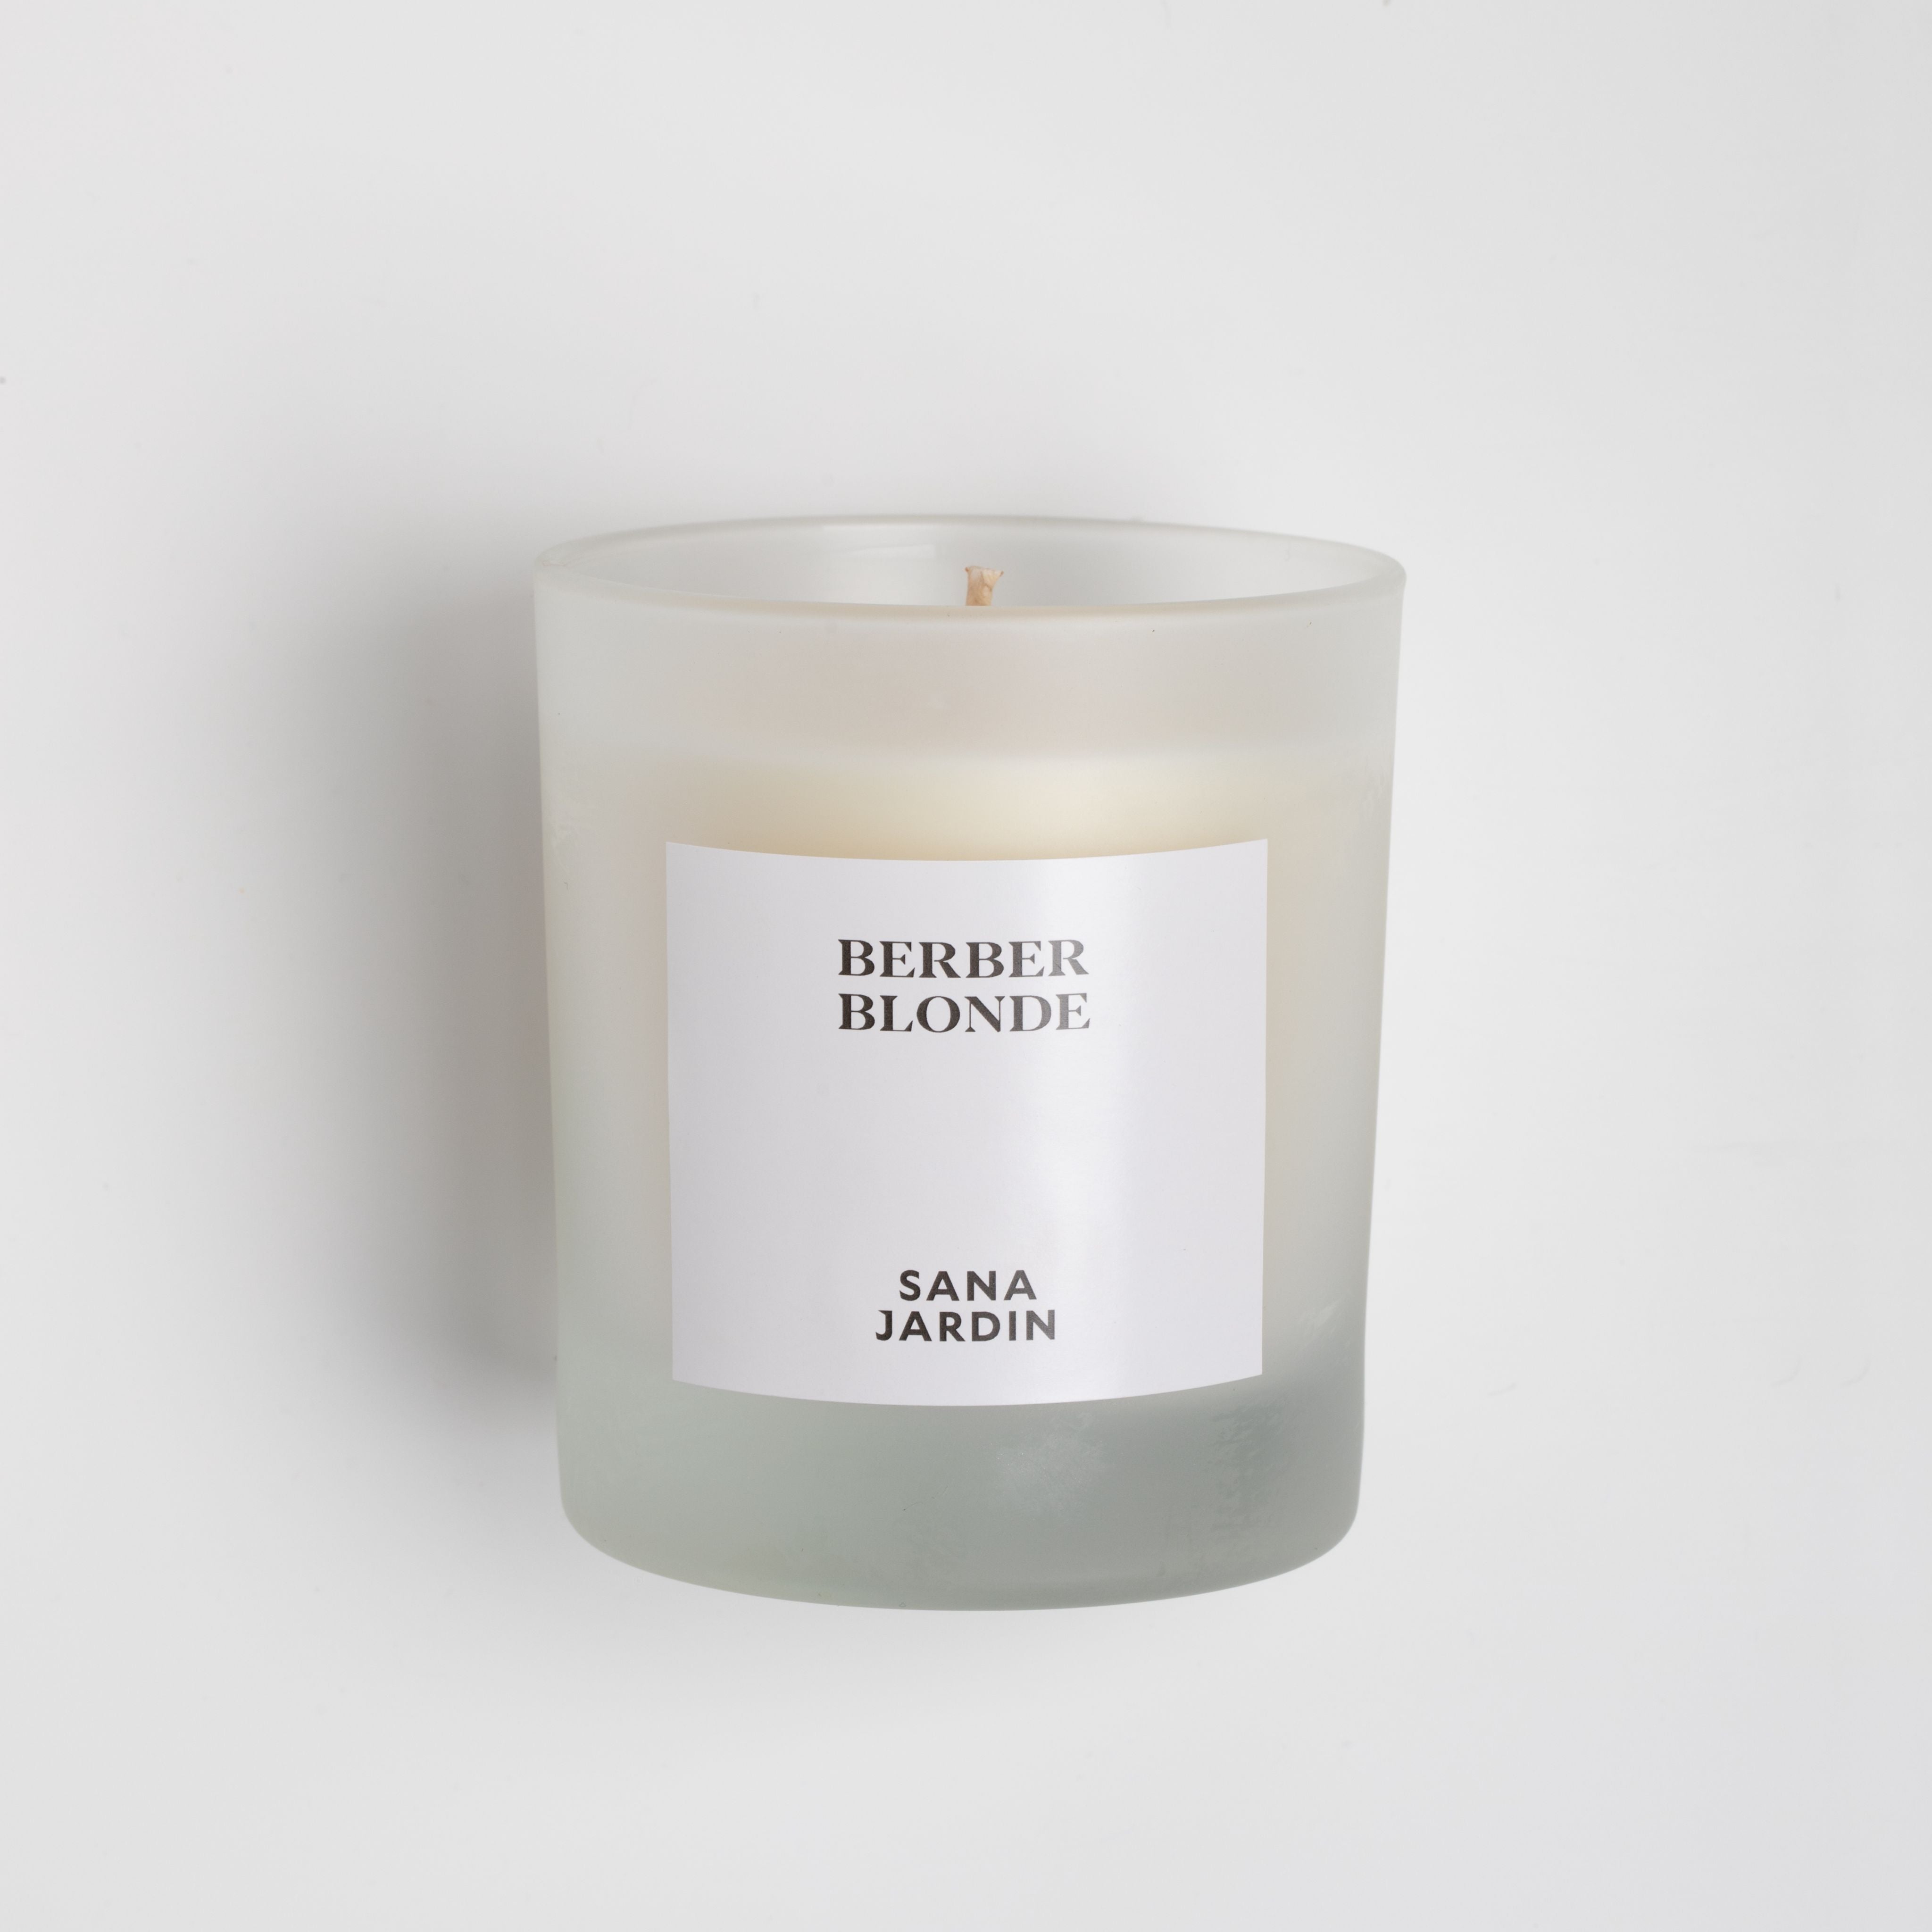 Berber Blonde Scented Candle